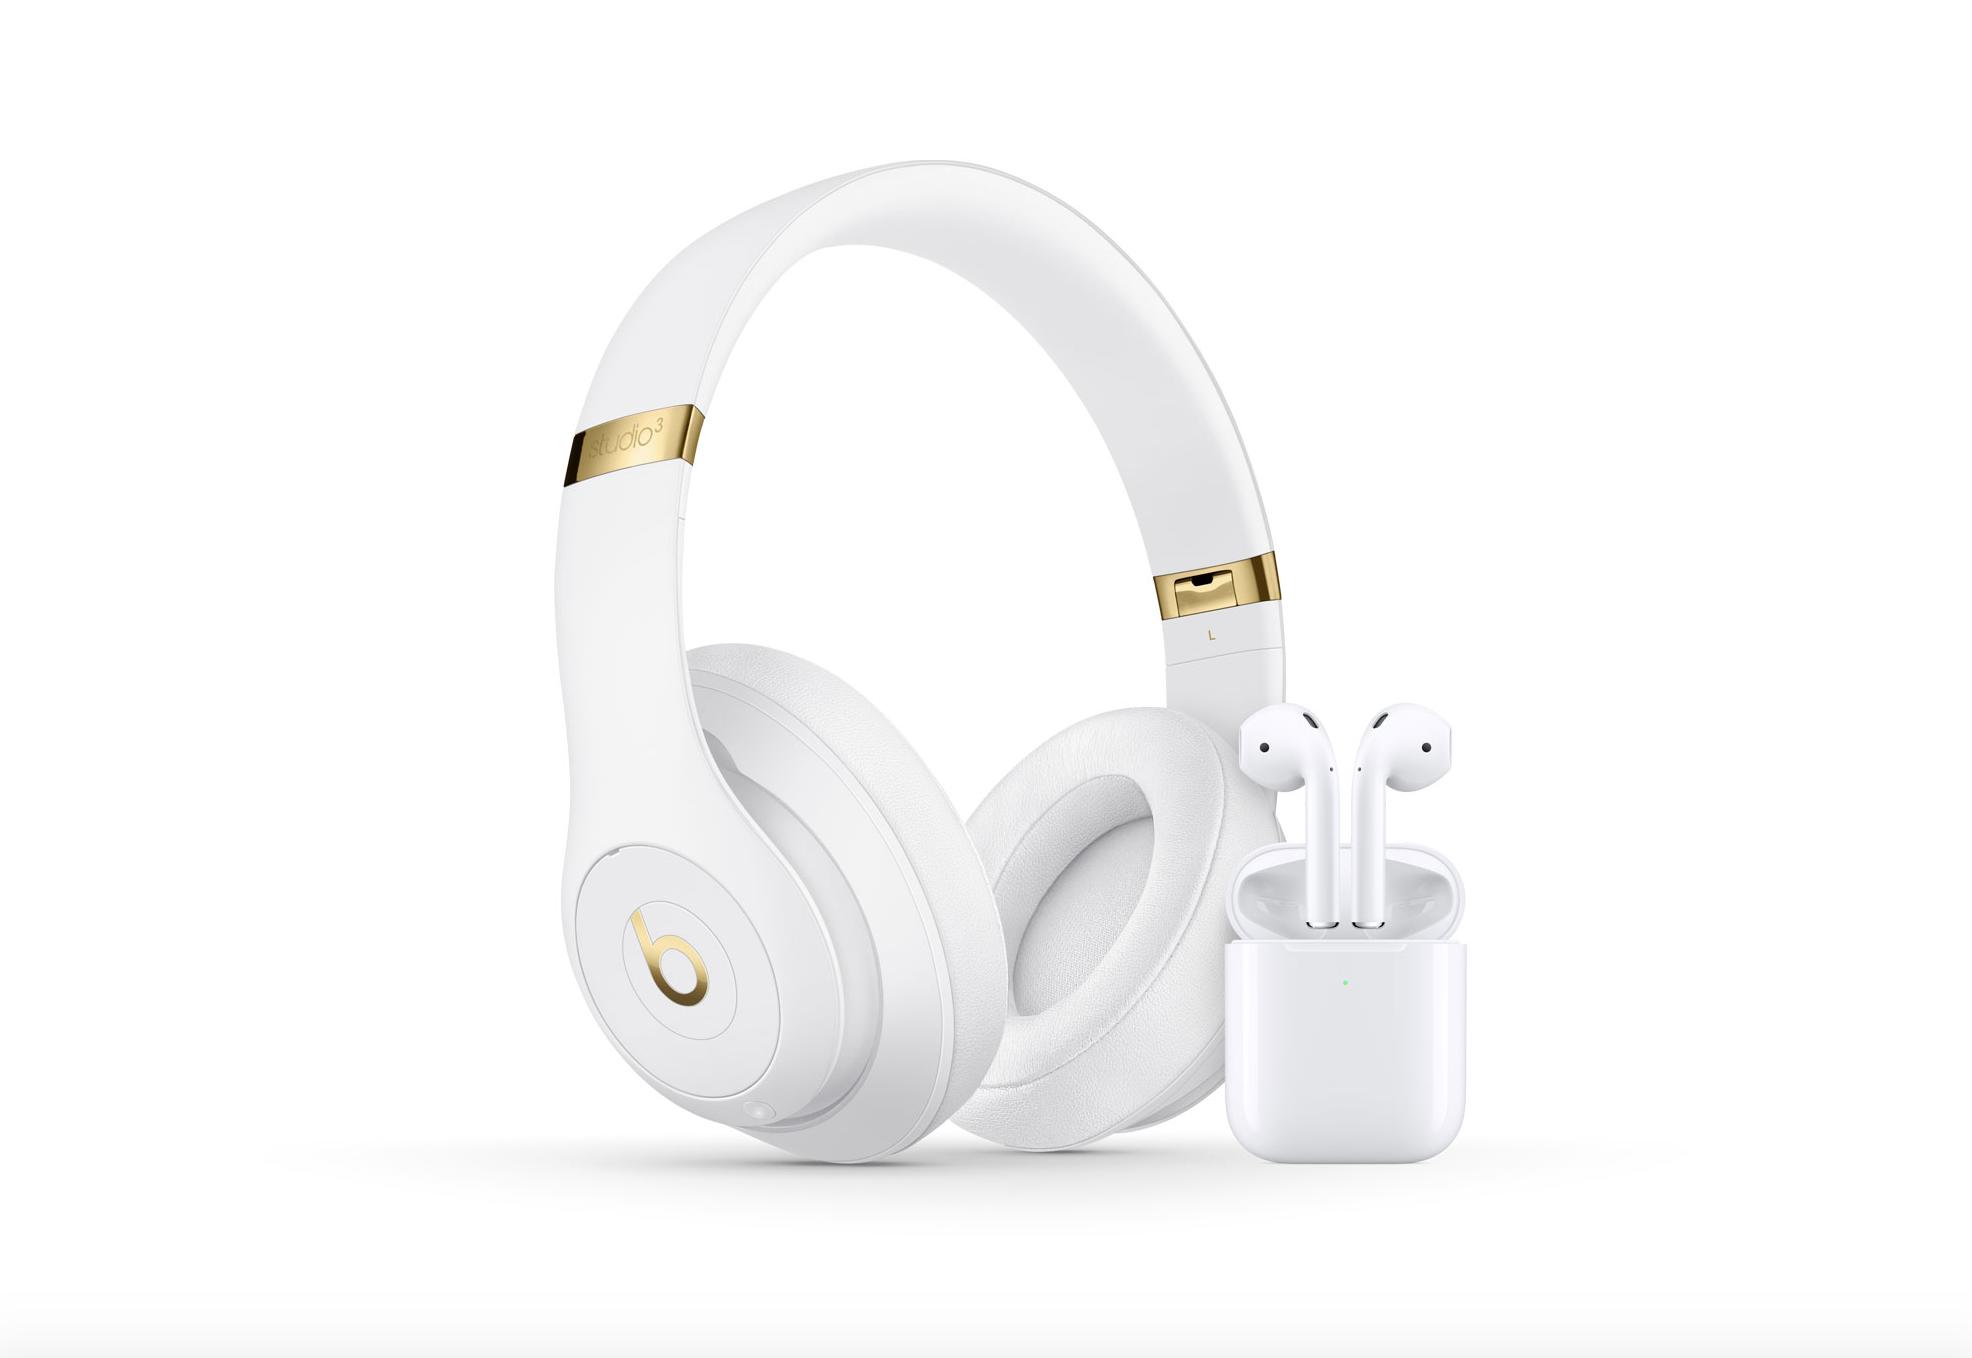 Apple adds AppleCare+ to AirPods and 